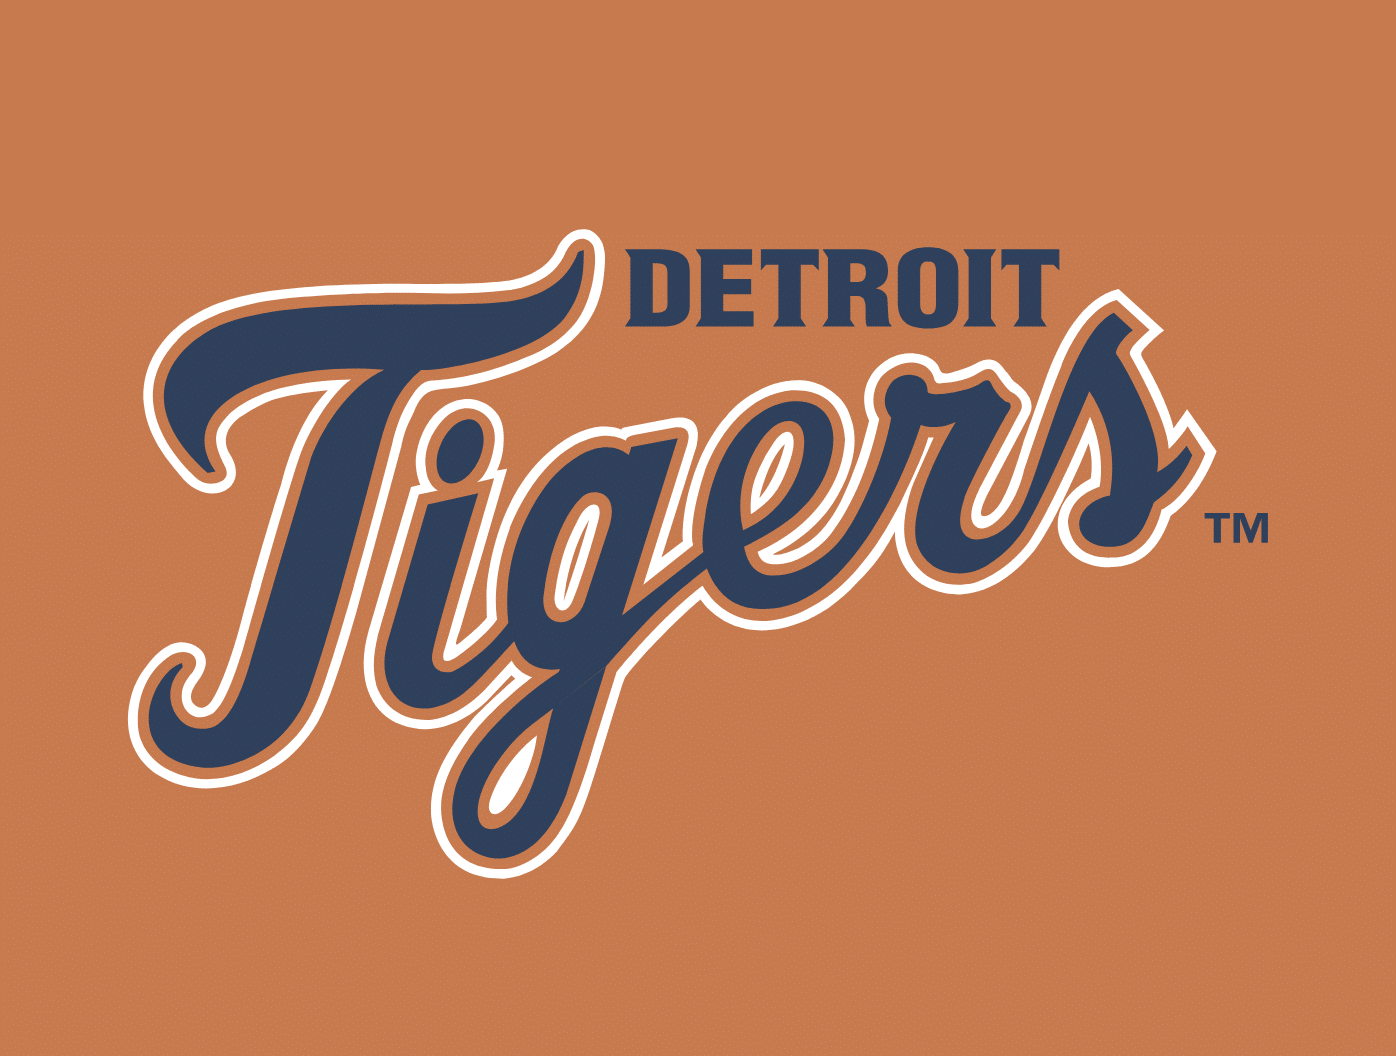 Detroit Tigers announce coaching changes Matthew Boyd and Cisnero to become free agents Detroit Tigers announce flurry of roster moves Detroit Tigers interested in signing Kenta Maeda Detroit Tigers are signing SP Kenta Maeda Detroit Tigers to sign Andrew Chafin